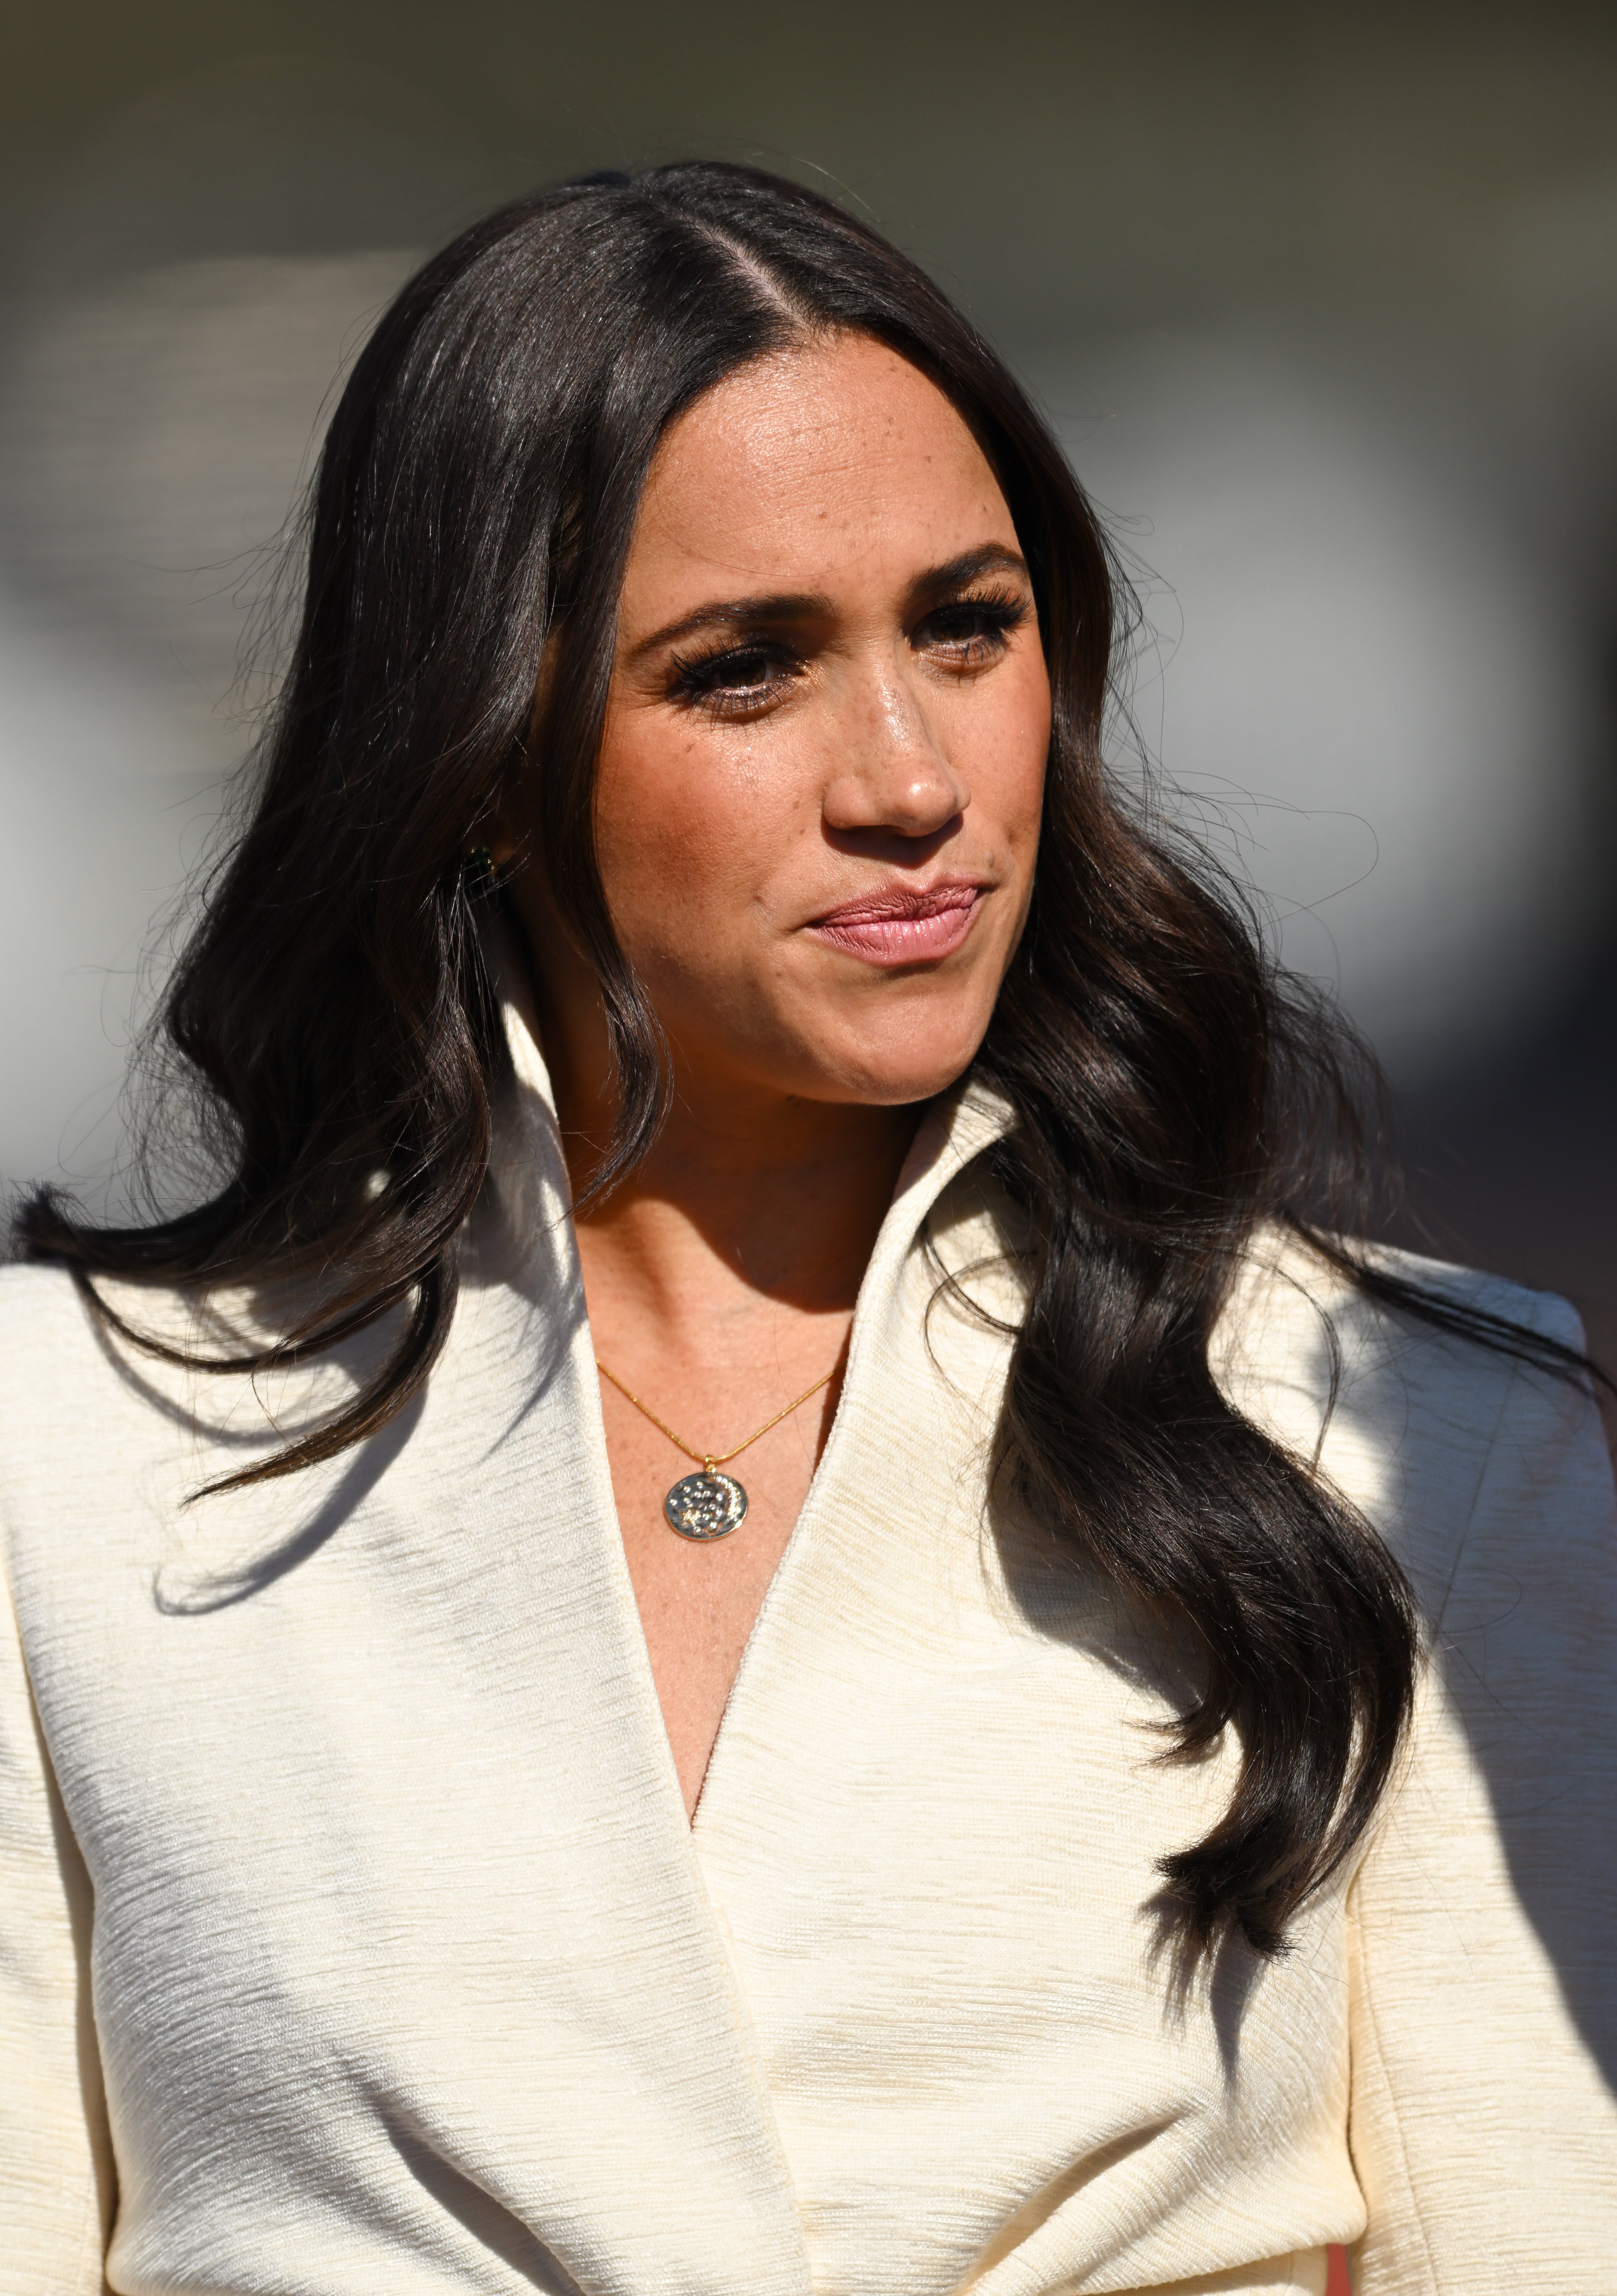 Meghan, Duchess of Sussex attends the athletics event during the Invictus Games at Zuiderpark on April 17, 2022, in The Hague, Netherlands. | Source: Getty Images